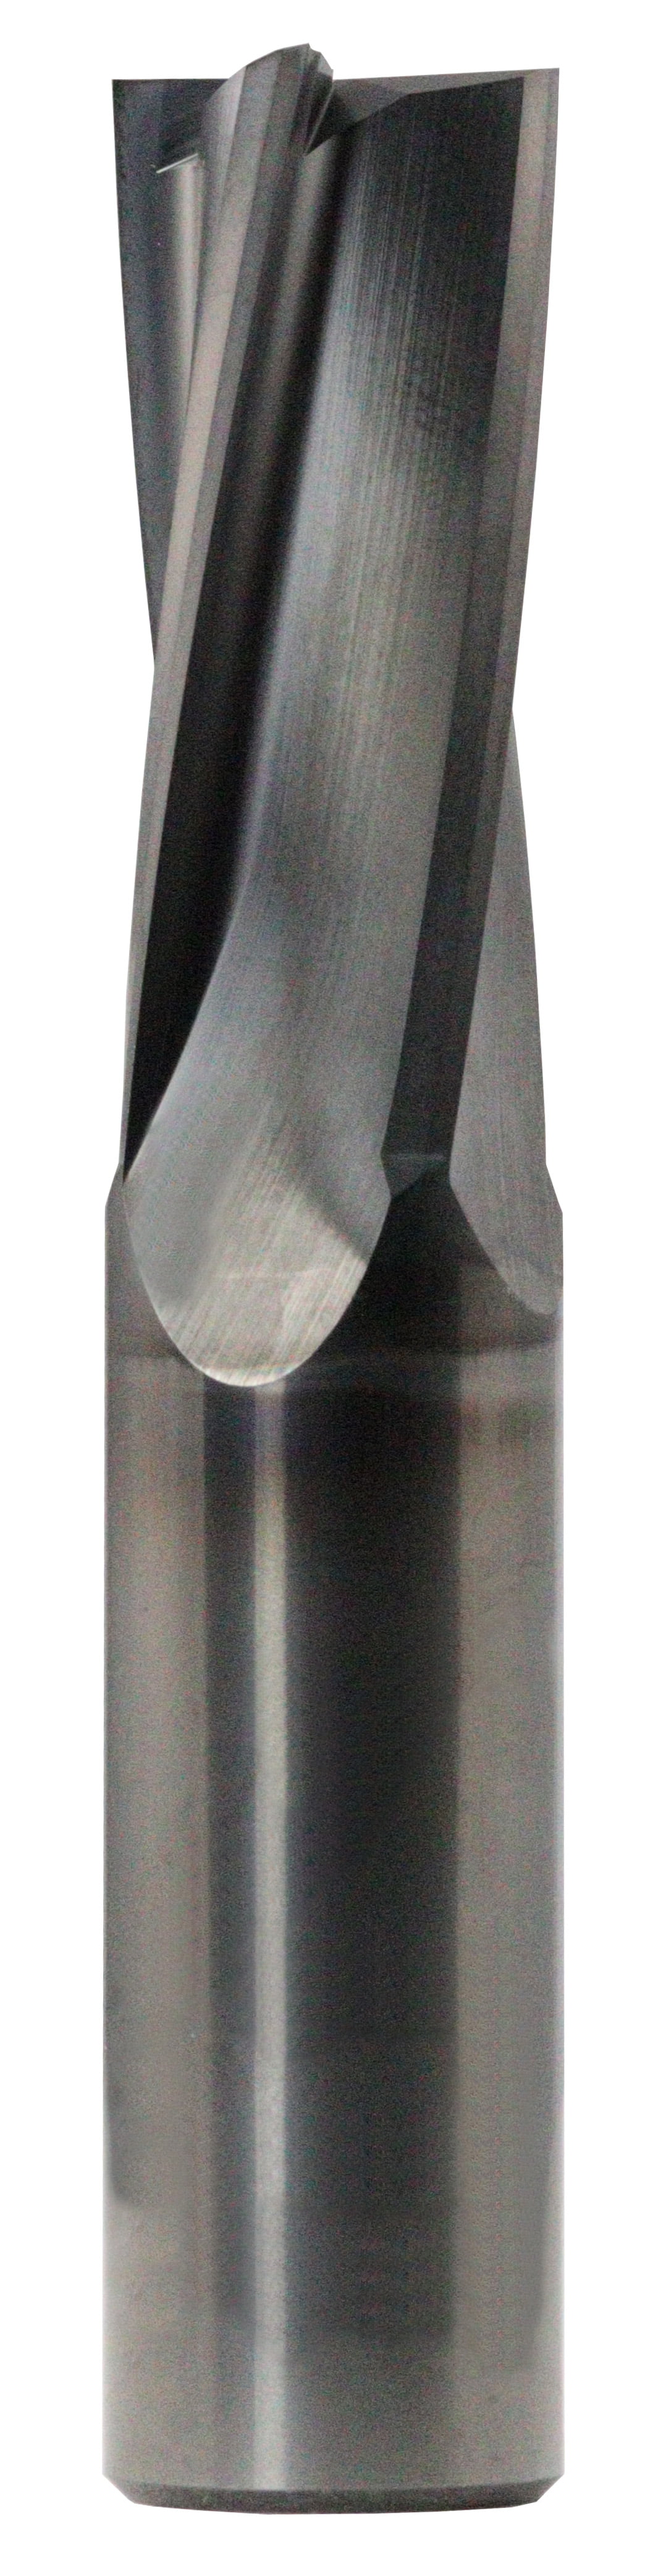 16.00mm Dia, 4 Flute, Square End End Mill - 83064